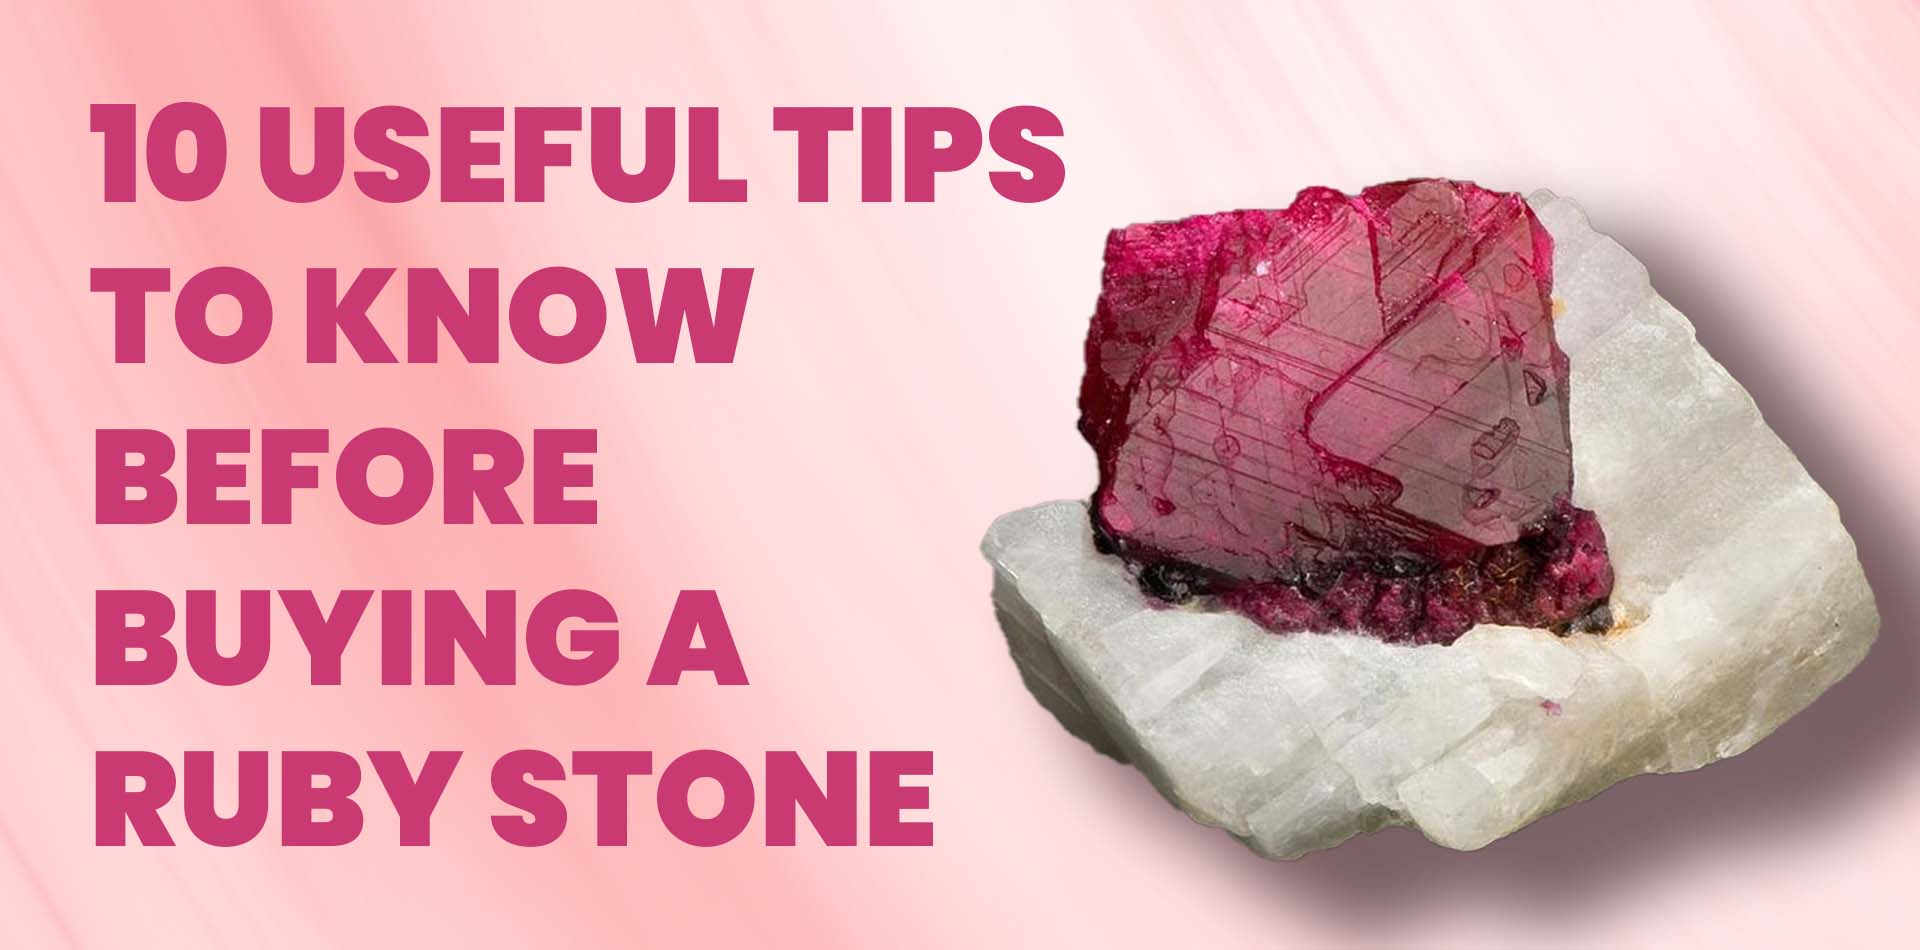 10 Useful Tips To Know Before Buying A Ruby Stone